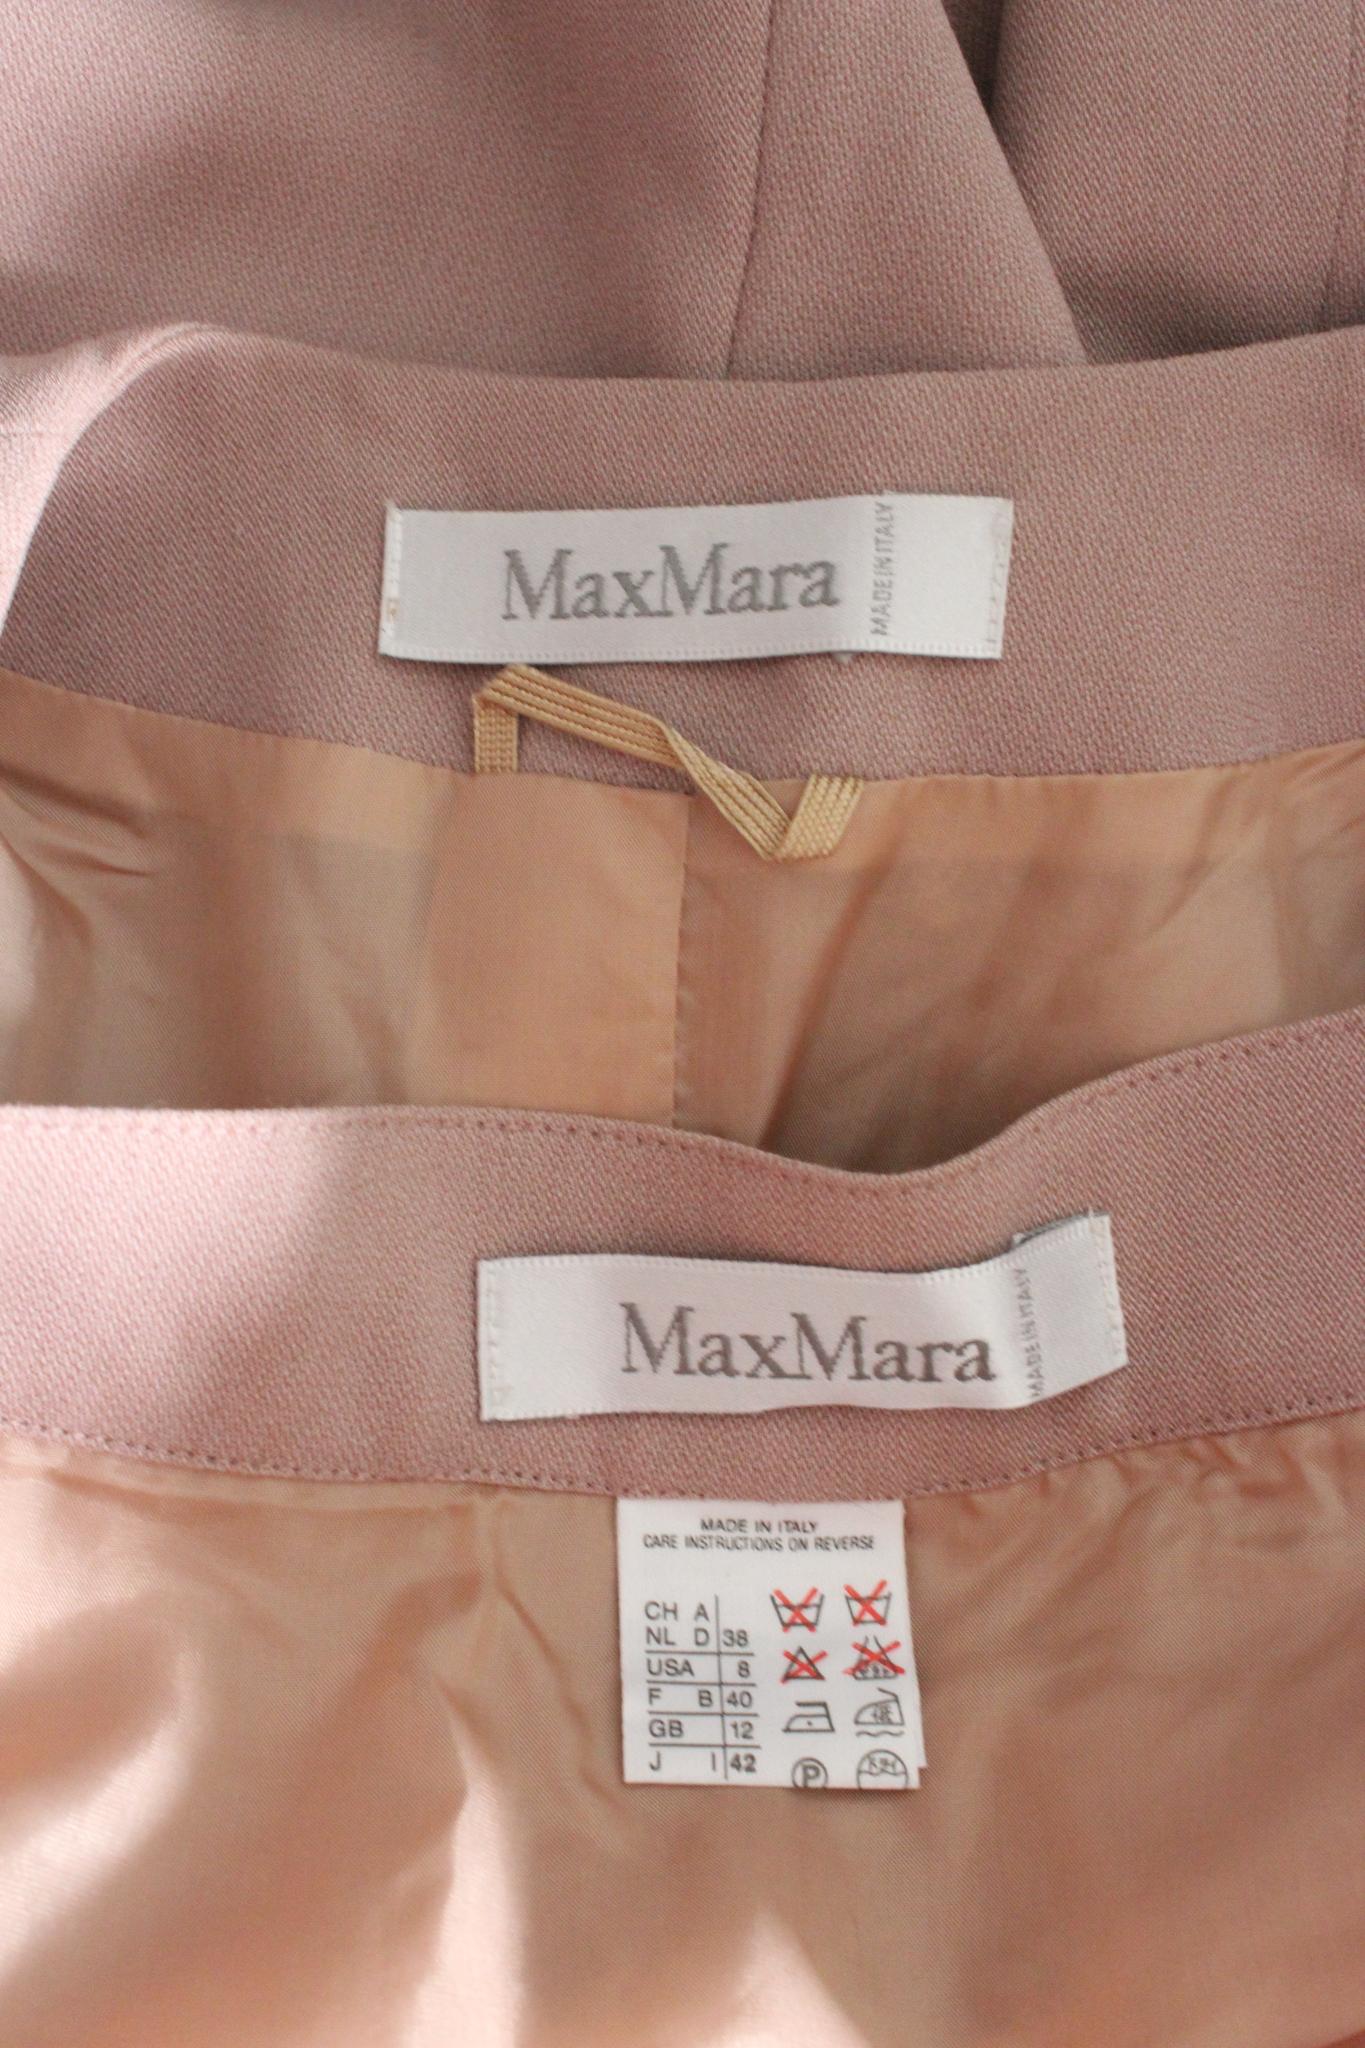 Max Mara classic 90s vintage skirt suit. Tailleur in lilac colored, 80% wool, 20% viscose fabric. Made in italy.

Size: 42 It 8 Us 10 Uk

Shoulder: 44cm
Bust/Chest: 49 cm
Sleeve: 60cm
Length: 61cm
Skirt waist: 35cm
Skirt length: 62cm